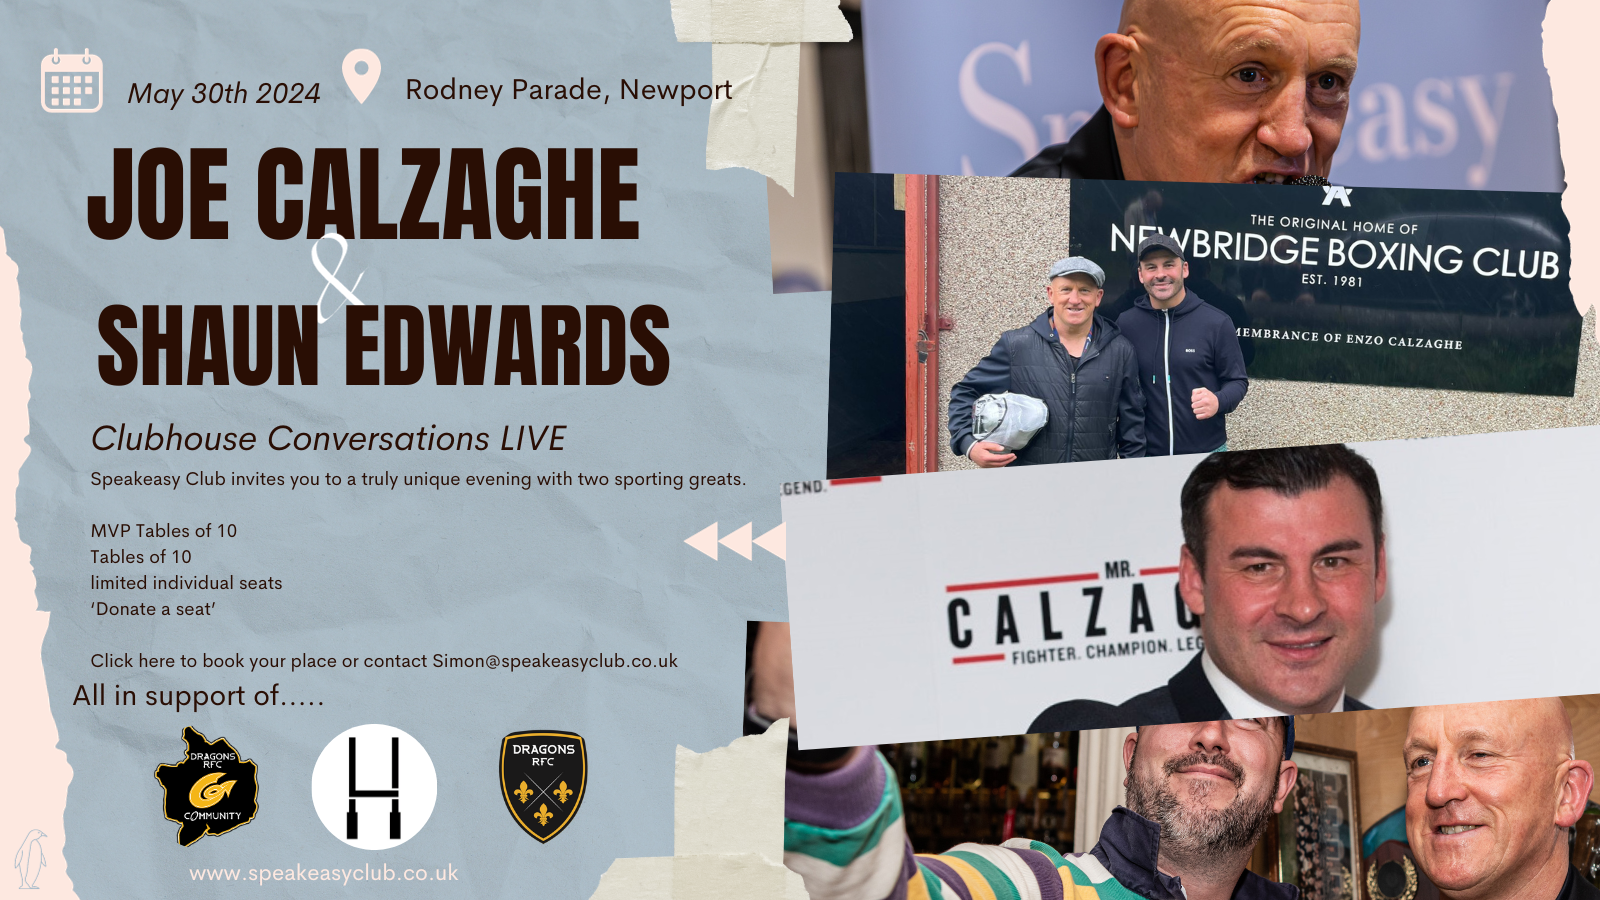 Clubhouse Conversations LIVE. Rodney Parade, Newport